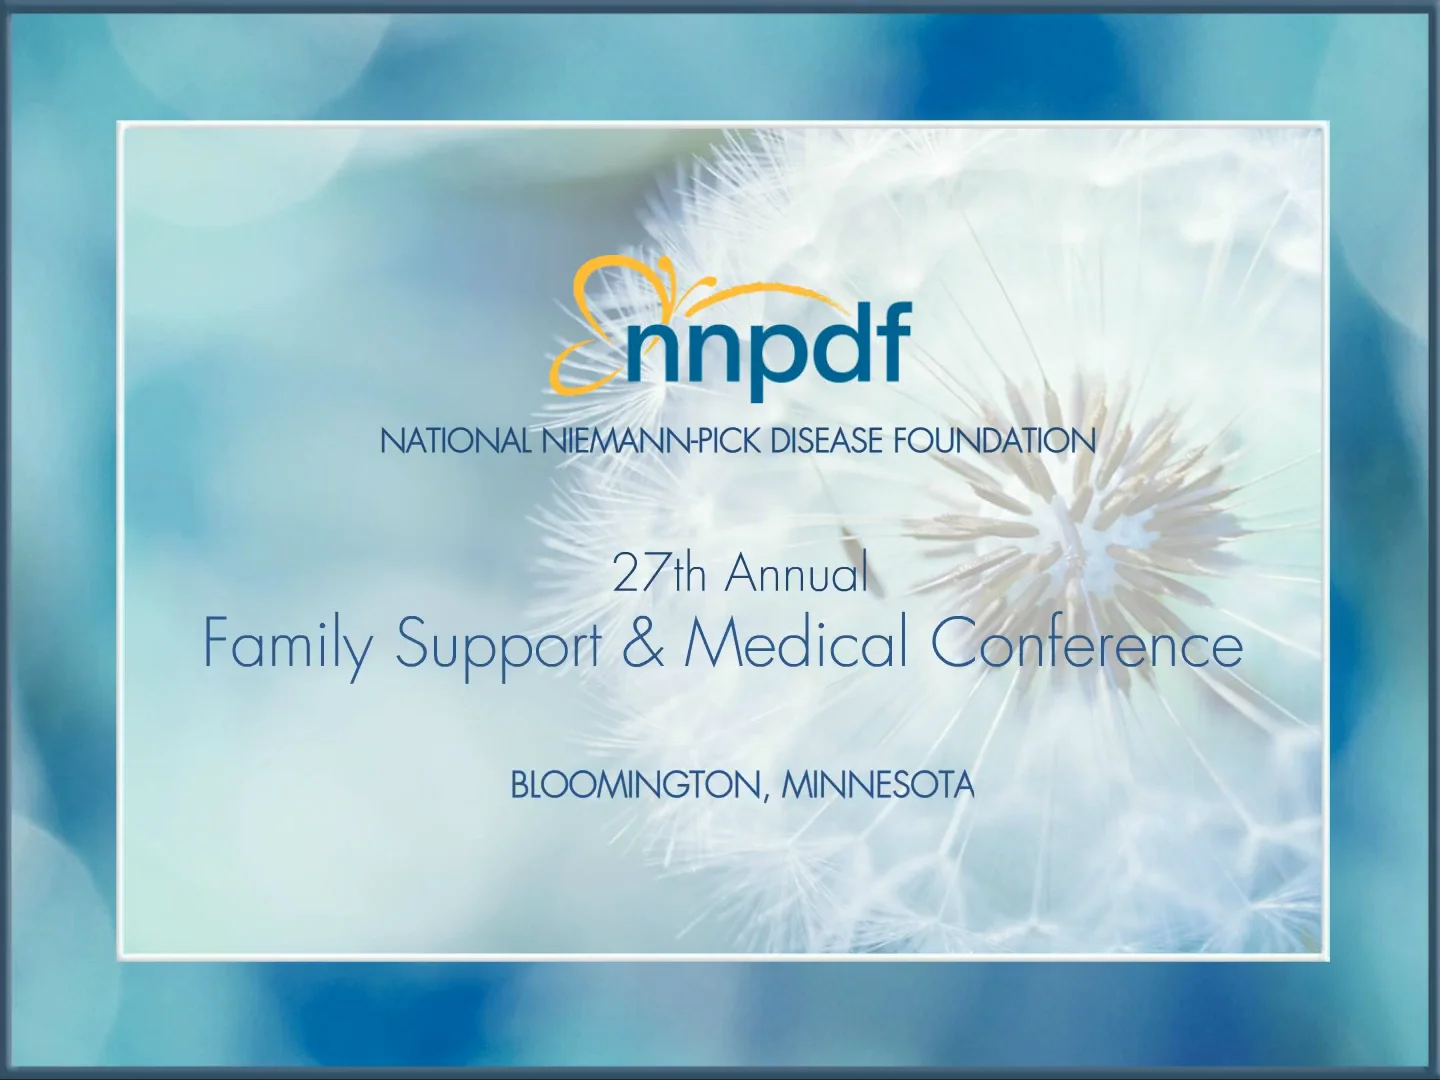 NNPDF – Supporting One Another. Supporting Our Community.